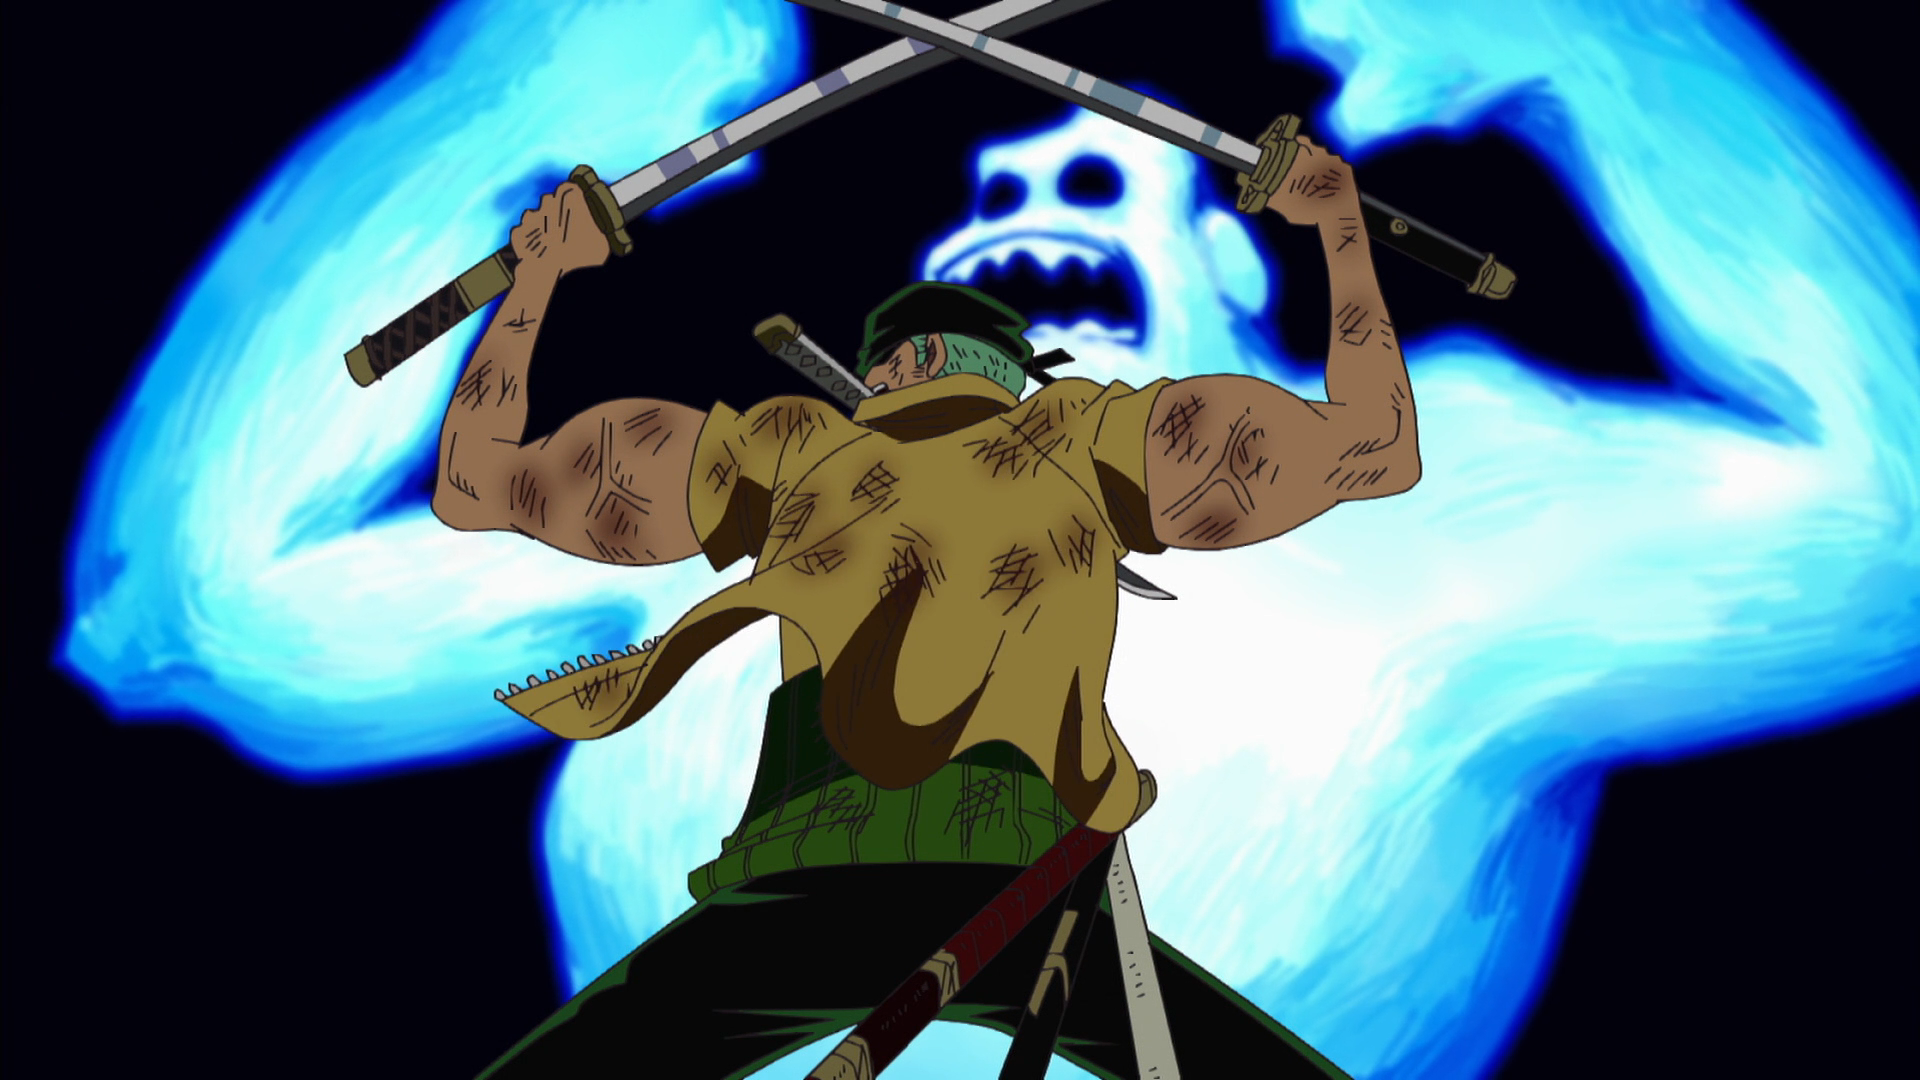 One Piece: WANO KUNI (892-Current) The Three-Sword Style of the